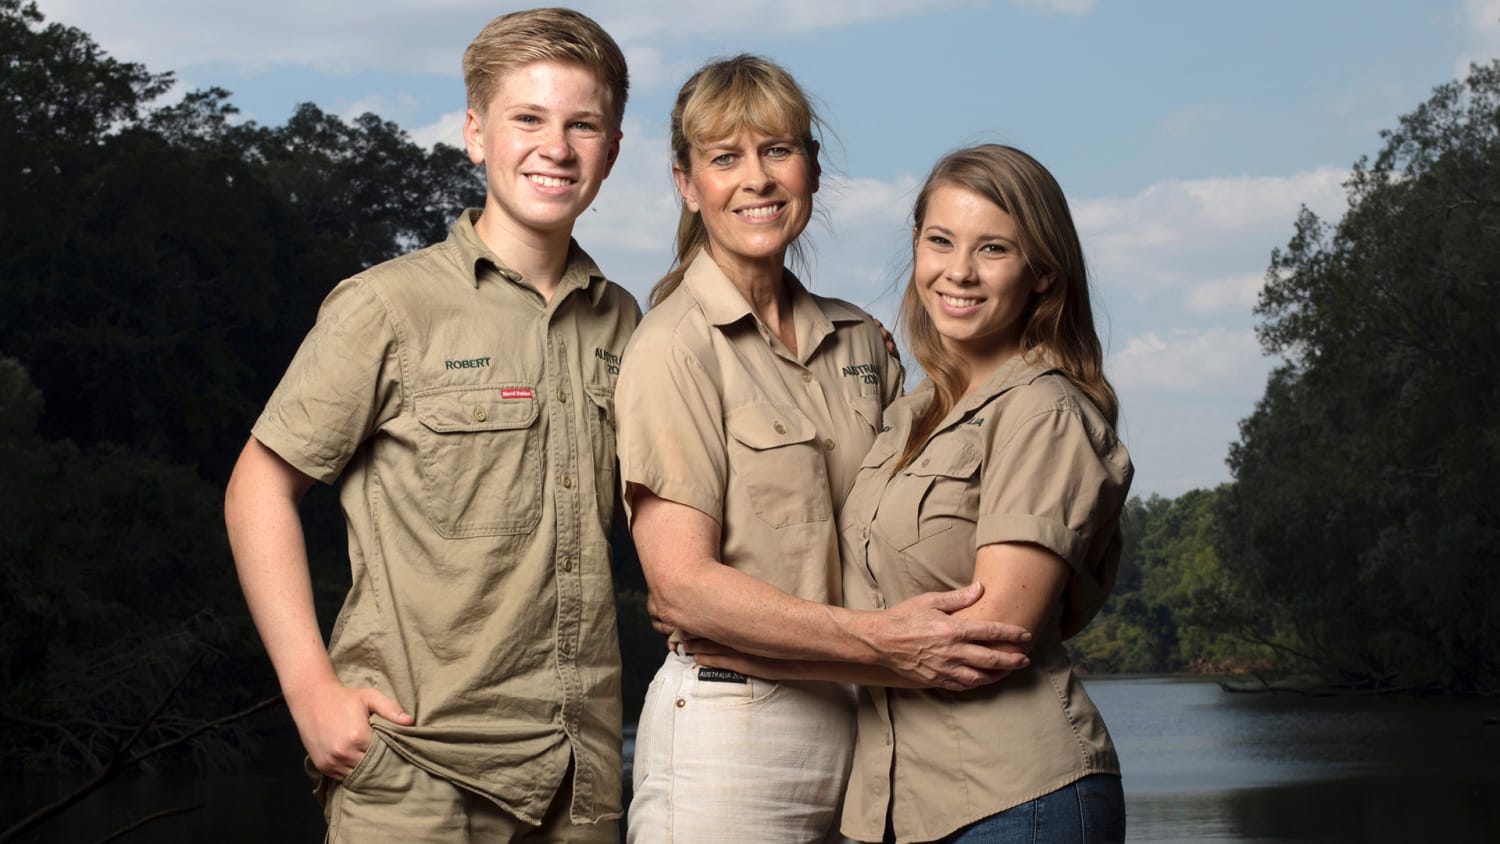 Steve Irwin's family returns to Animal Planet 11 years after his death